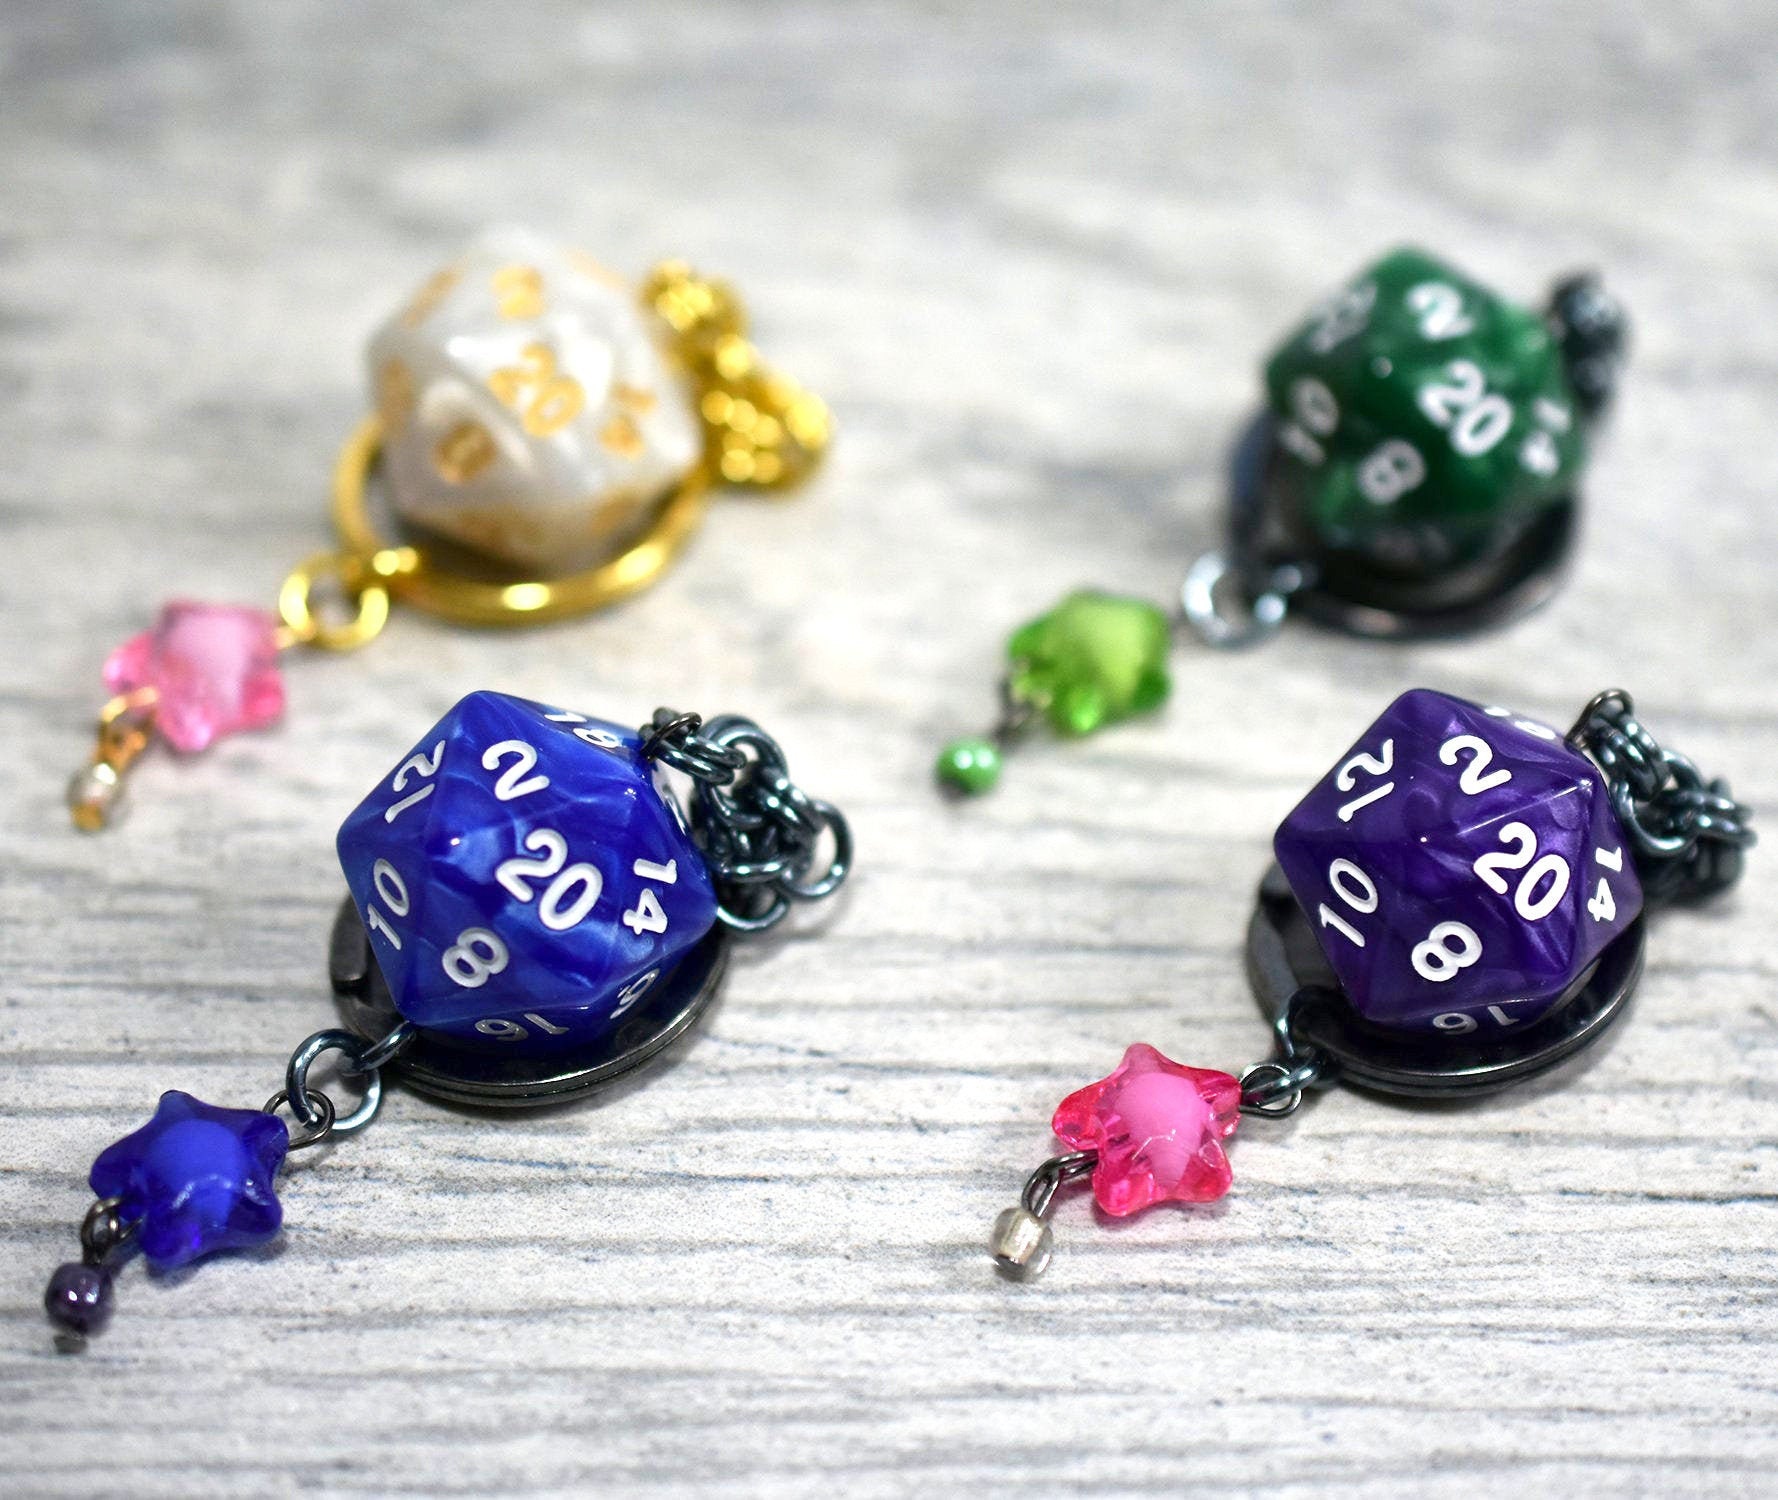 D20 Dice Necklace - EirynaElf's Ko-fi Shop - Ko-fi ❤️ Where creators get  support from fans through donations, memberships, shop sales and more! The  original 'Buy Me a Coffee' Page.